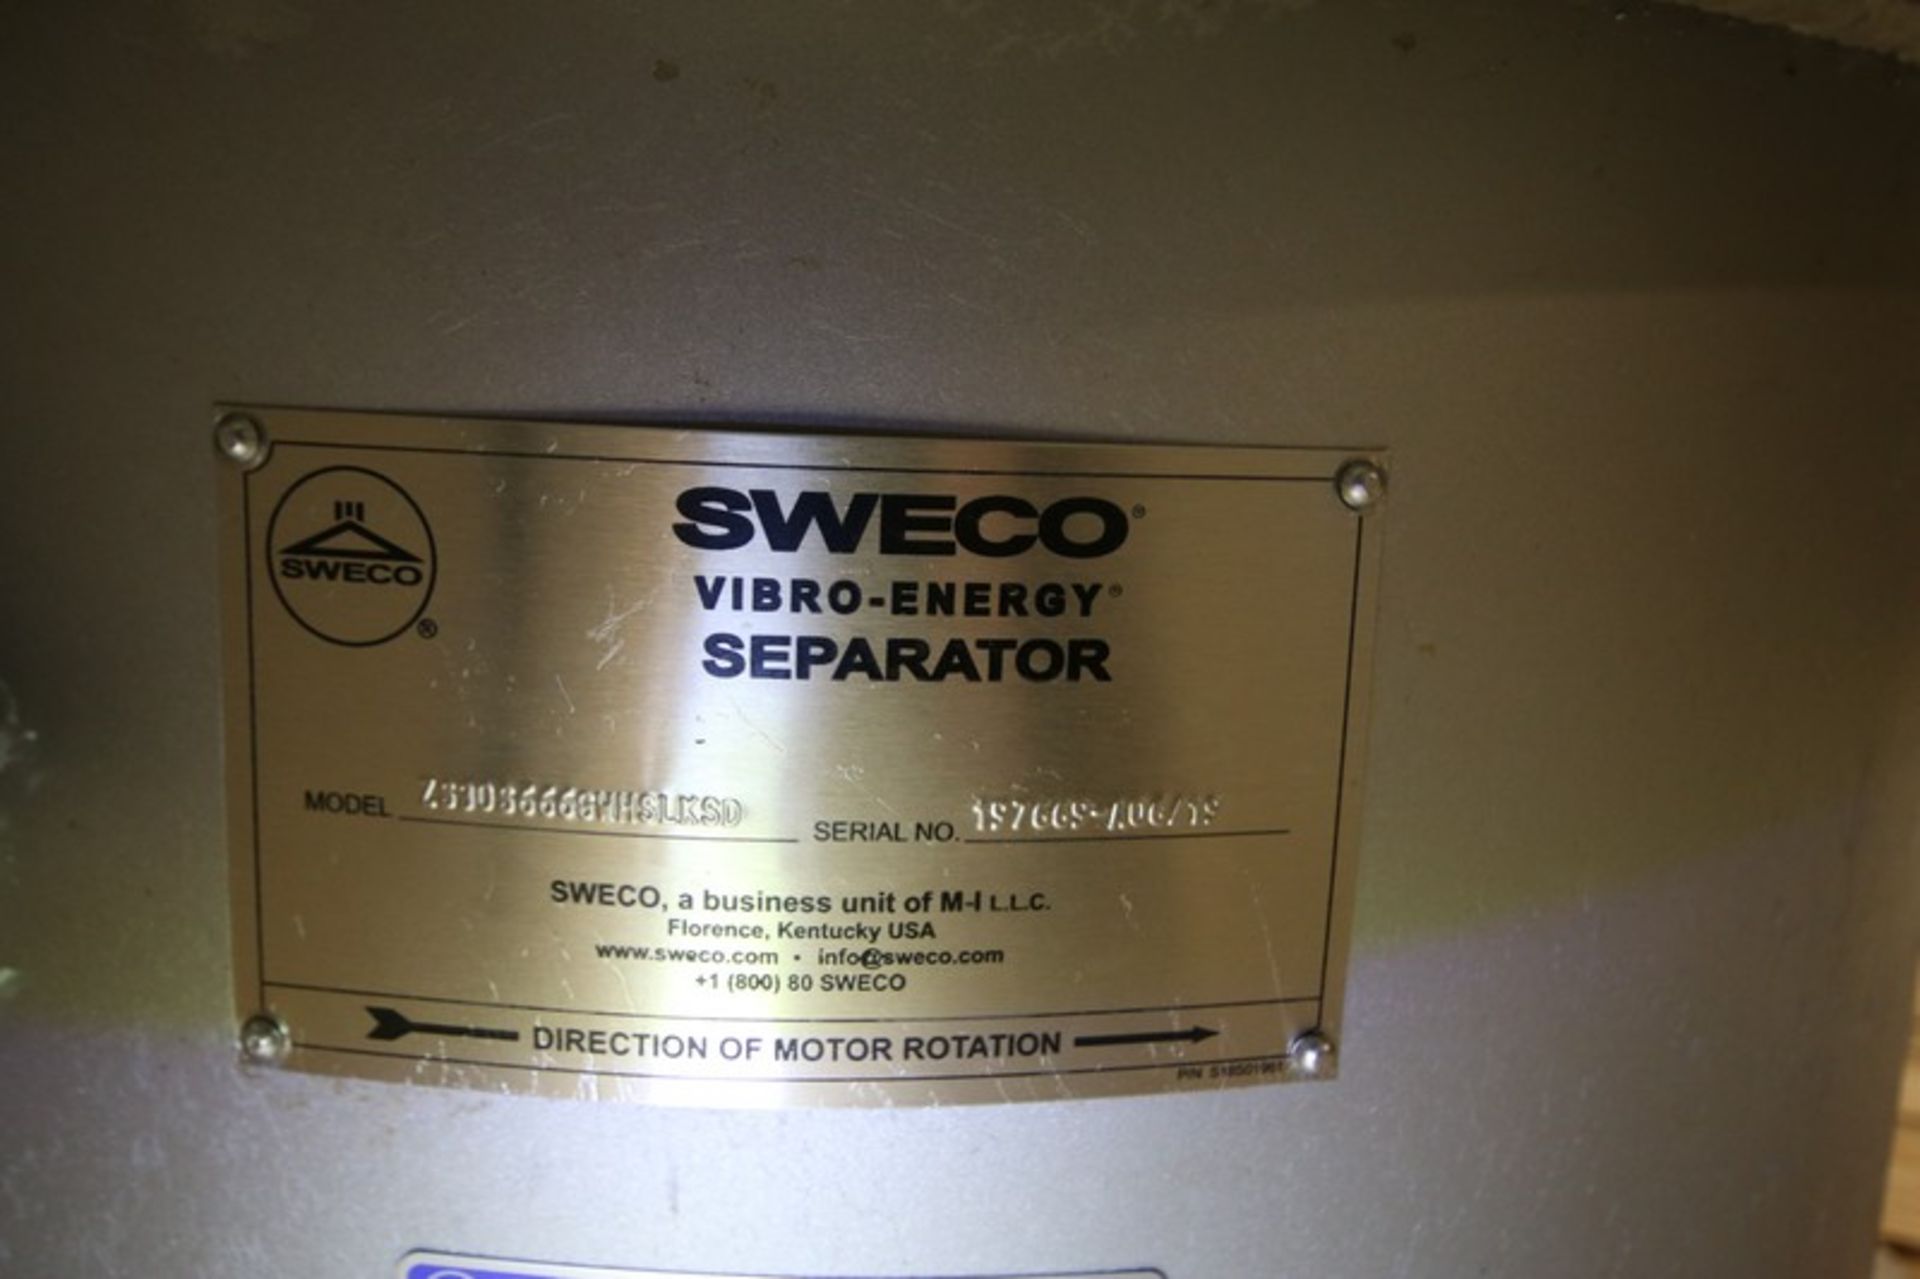 Sweco 30" Vibro-Energy S/S Deck Separator, Model ZS30S666WHSLKSD, SN 197669-A06/19, 0.5 hp / 1755 - Image 6 of 8